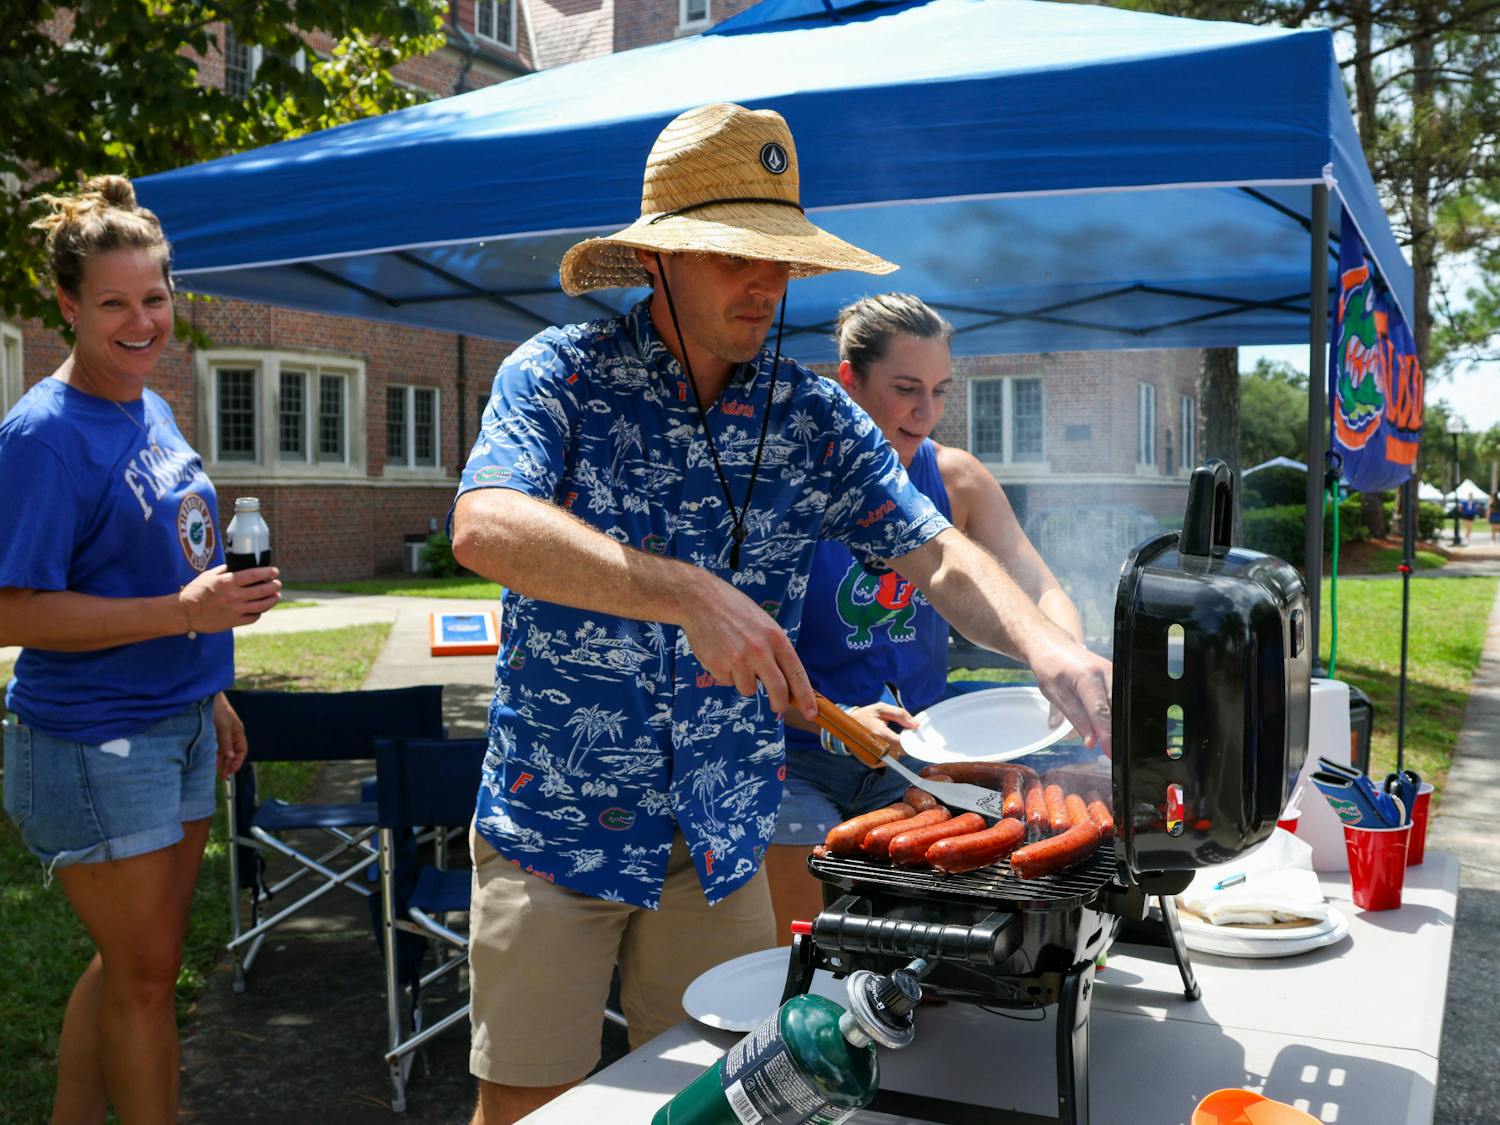 Tailgater Dane Ullian grills hotdogs off of West University Avenue before Florida’s matchup with Utah Saturday, Sept. 3, 2022.